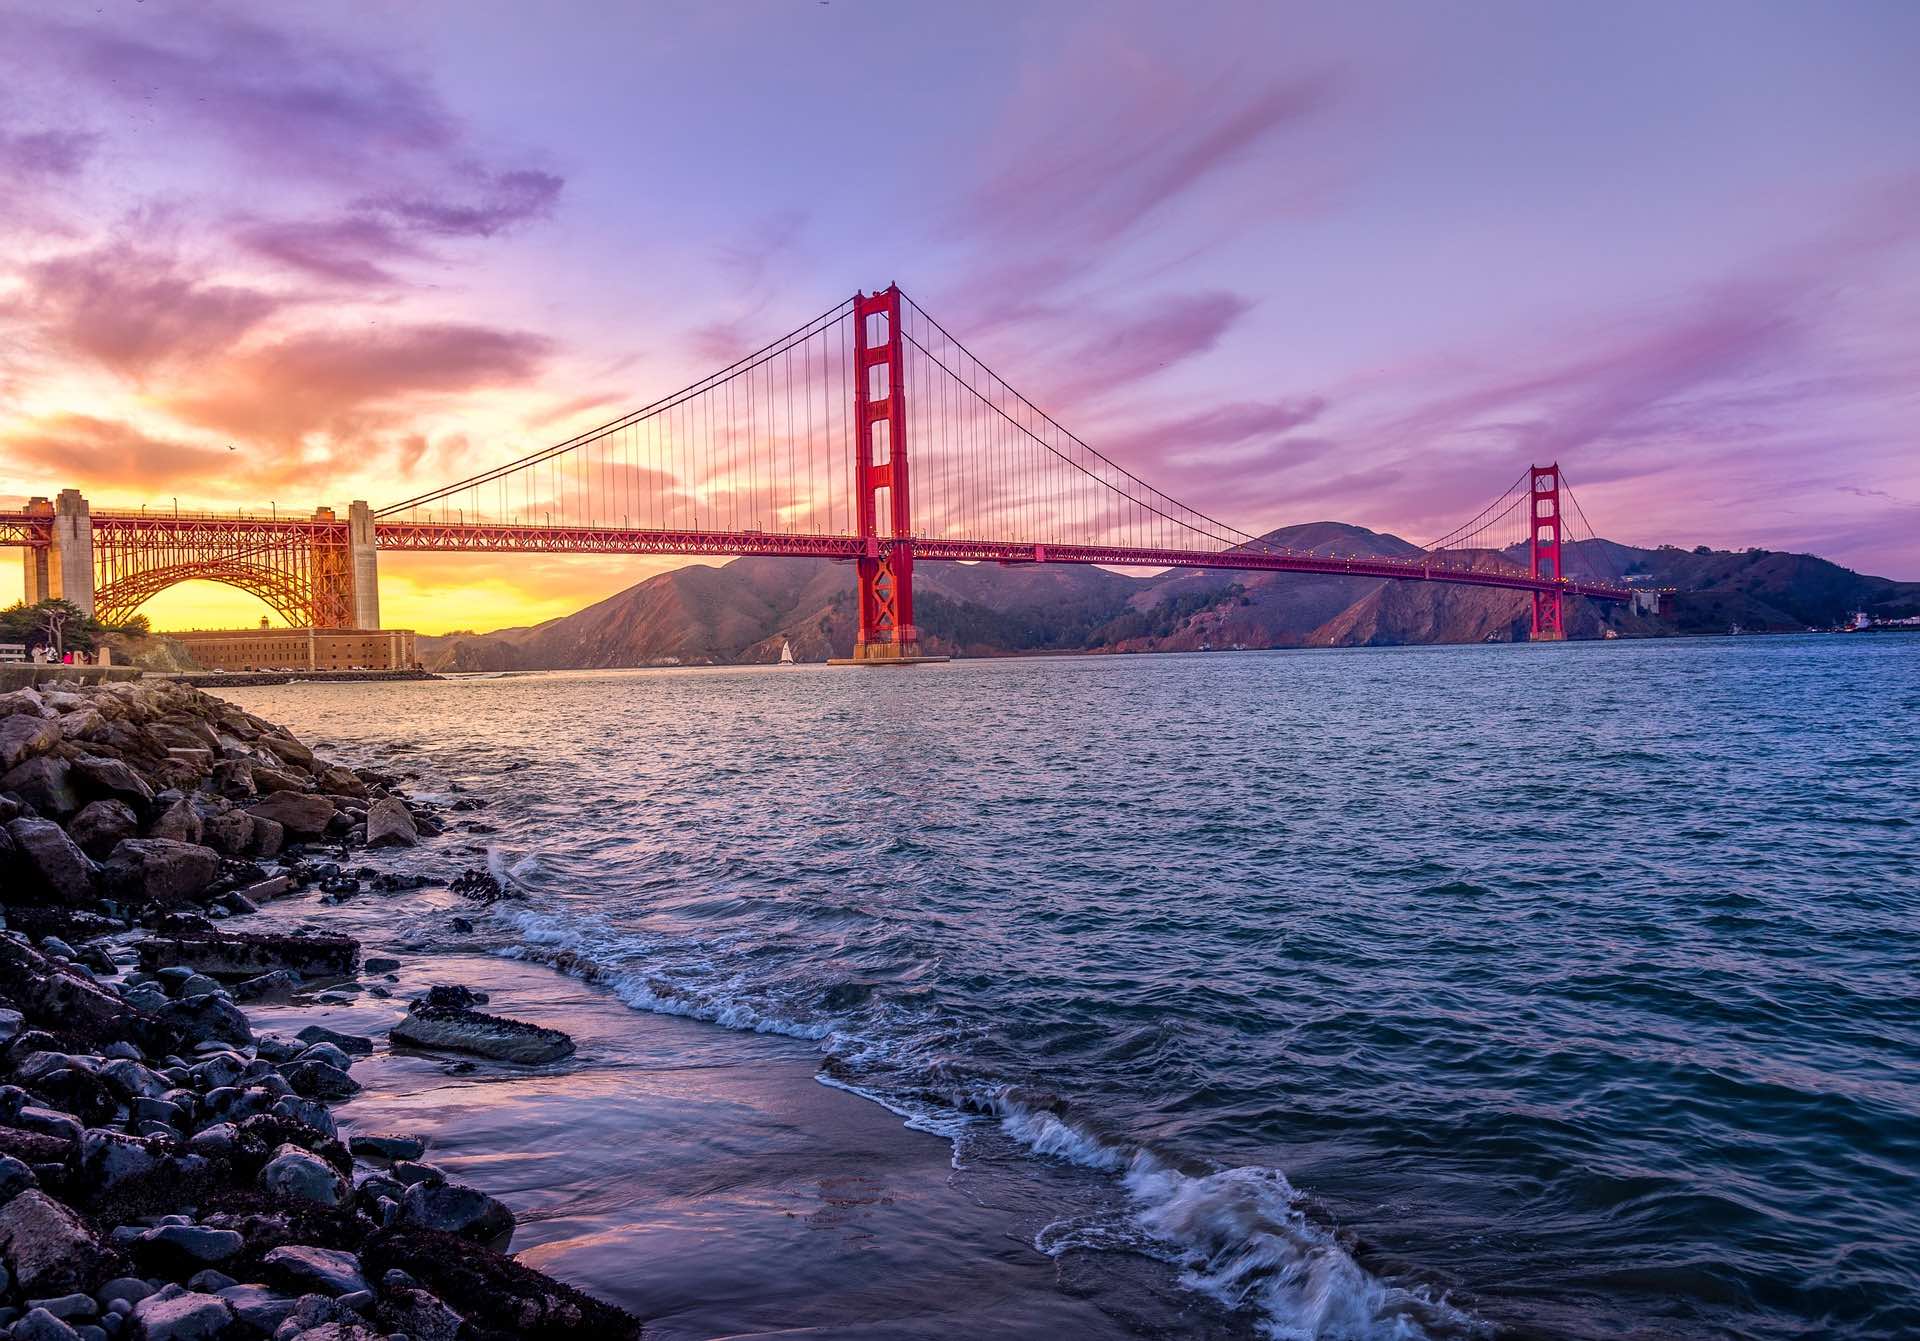 Golden Gate Bridge over water with a sunset